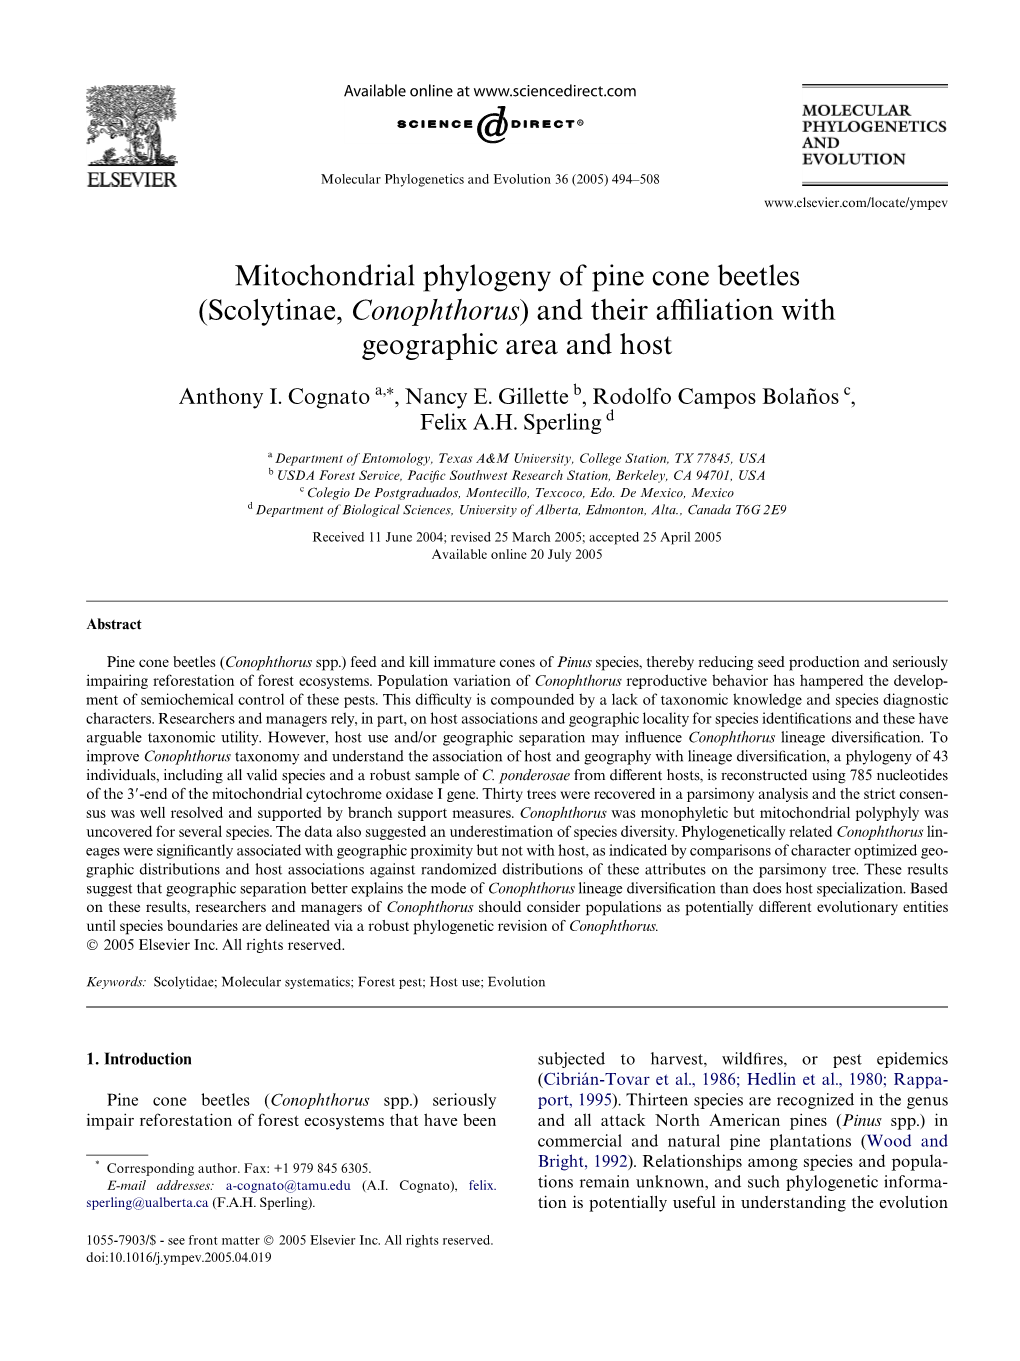 Mitochondrial Phylogeny of Pine Cone Beetles (Scolytinae, Conophthorus) and Their Ayliation with Geographic Area and Host